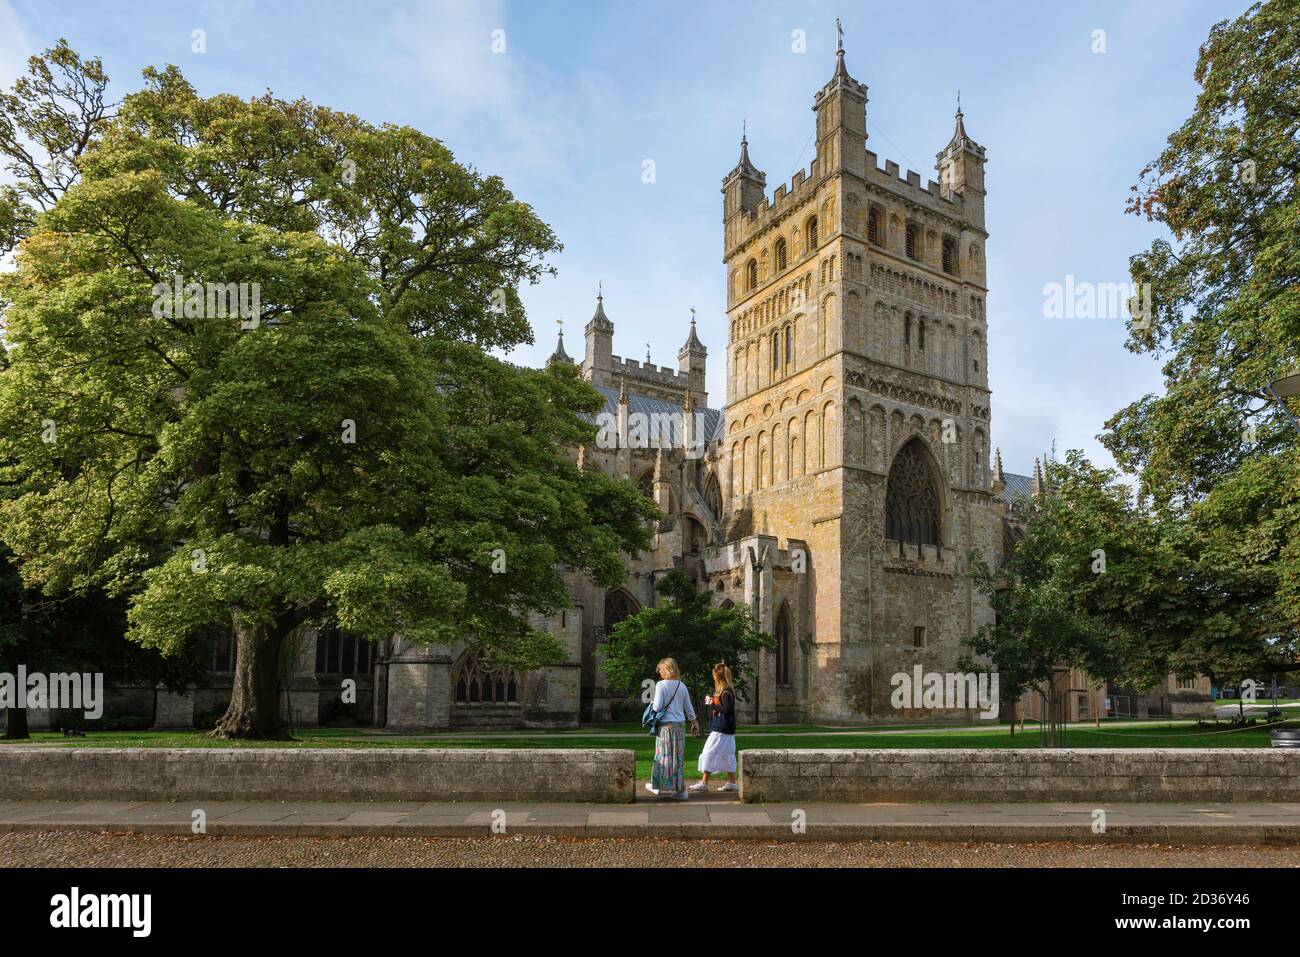 Exeter Cathedral, view in summer of people in the Cathedral Close looking at the north side of the Cathedral of St Peter in Exeter, Devon, England Stock Photo